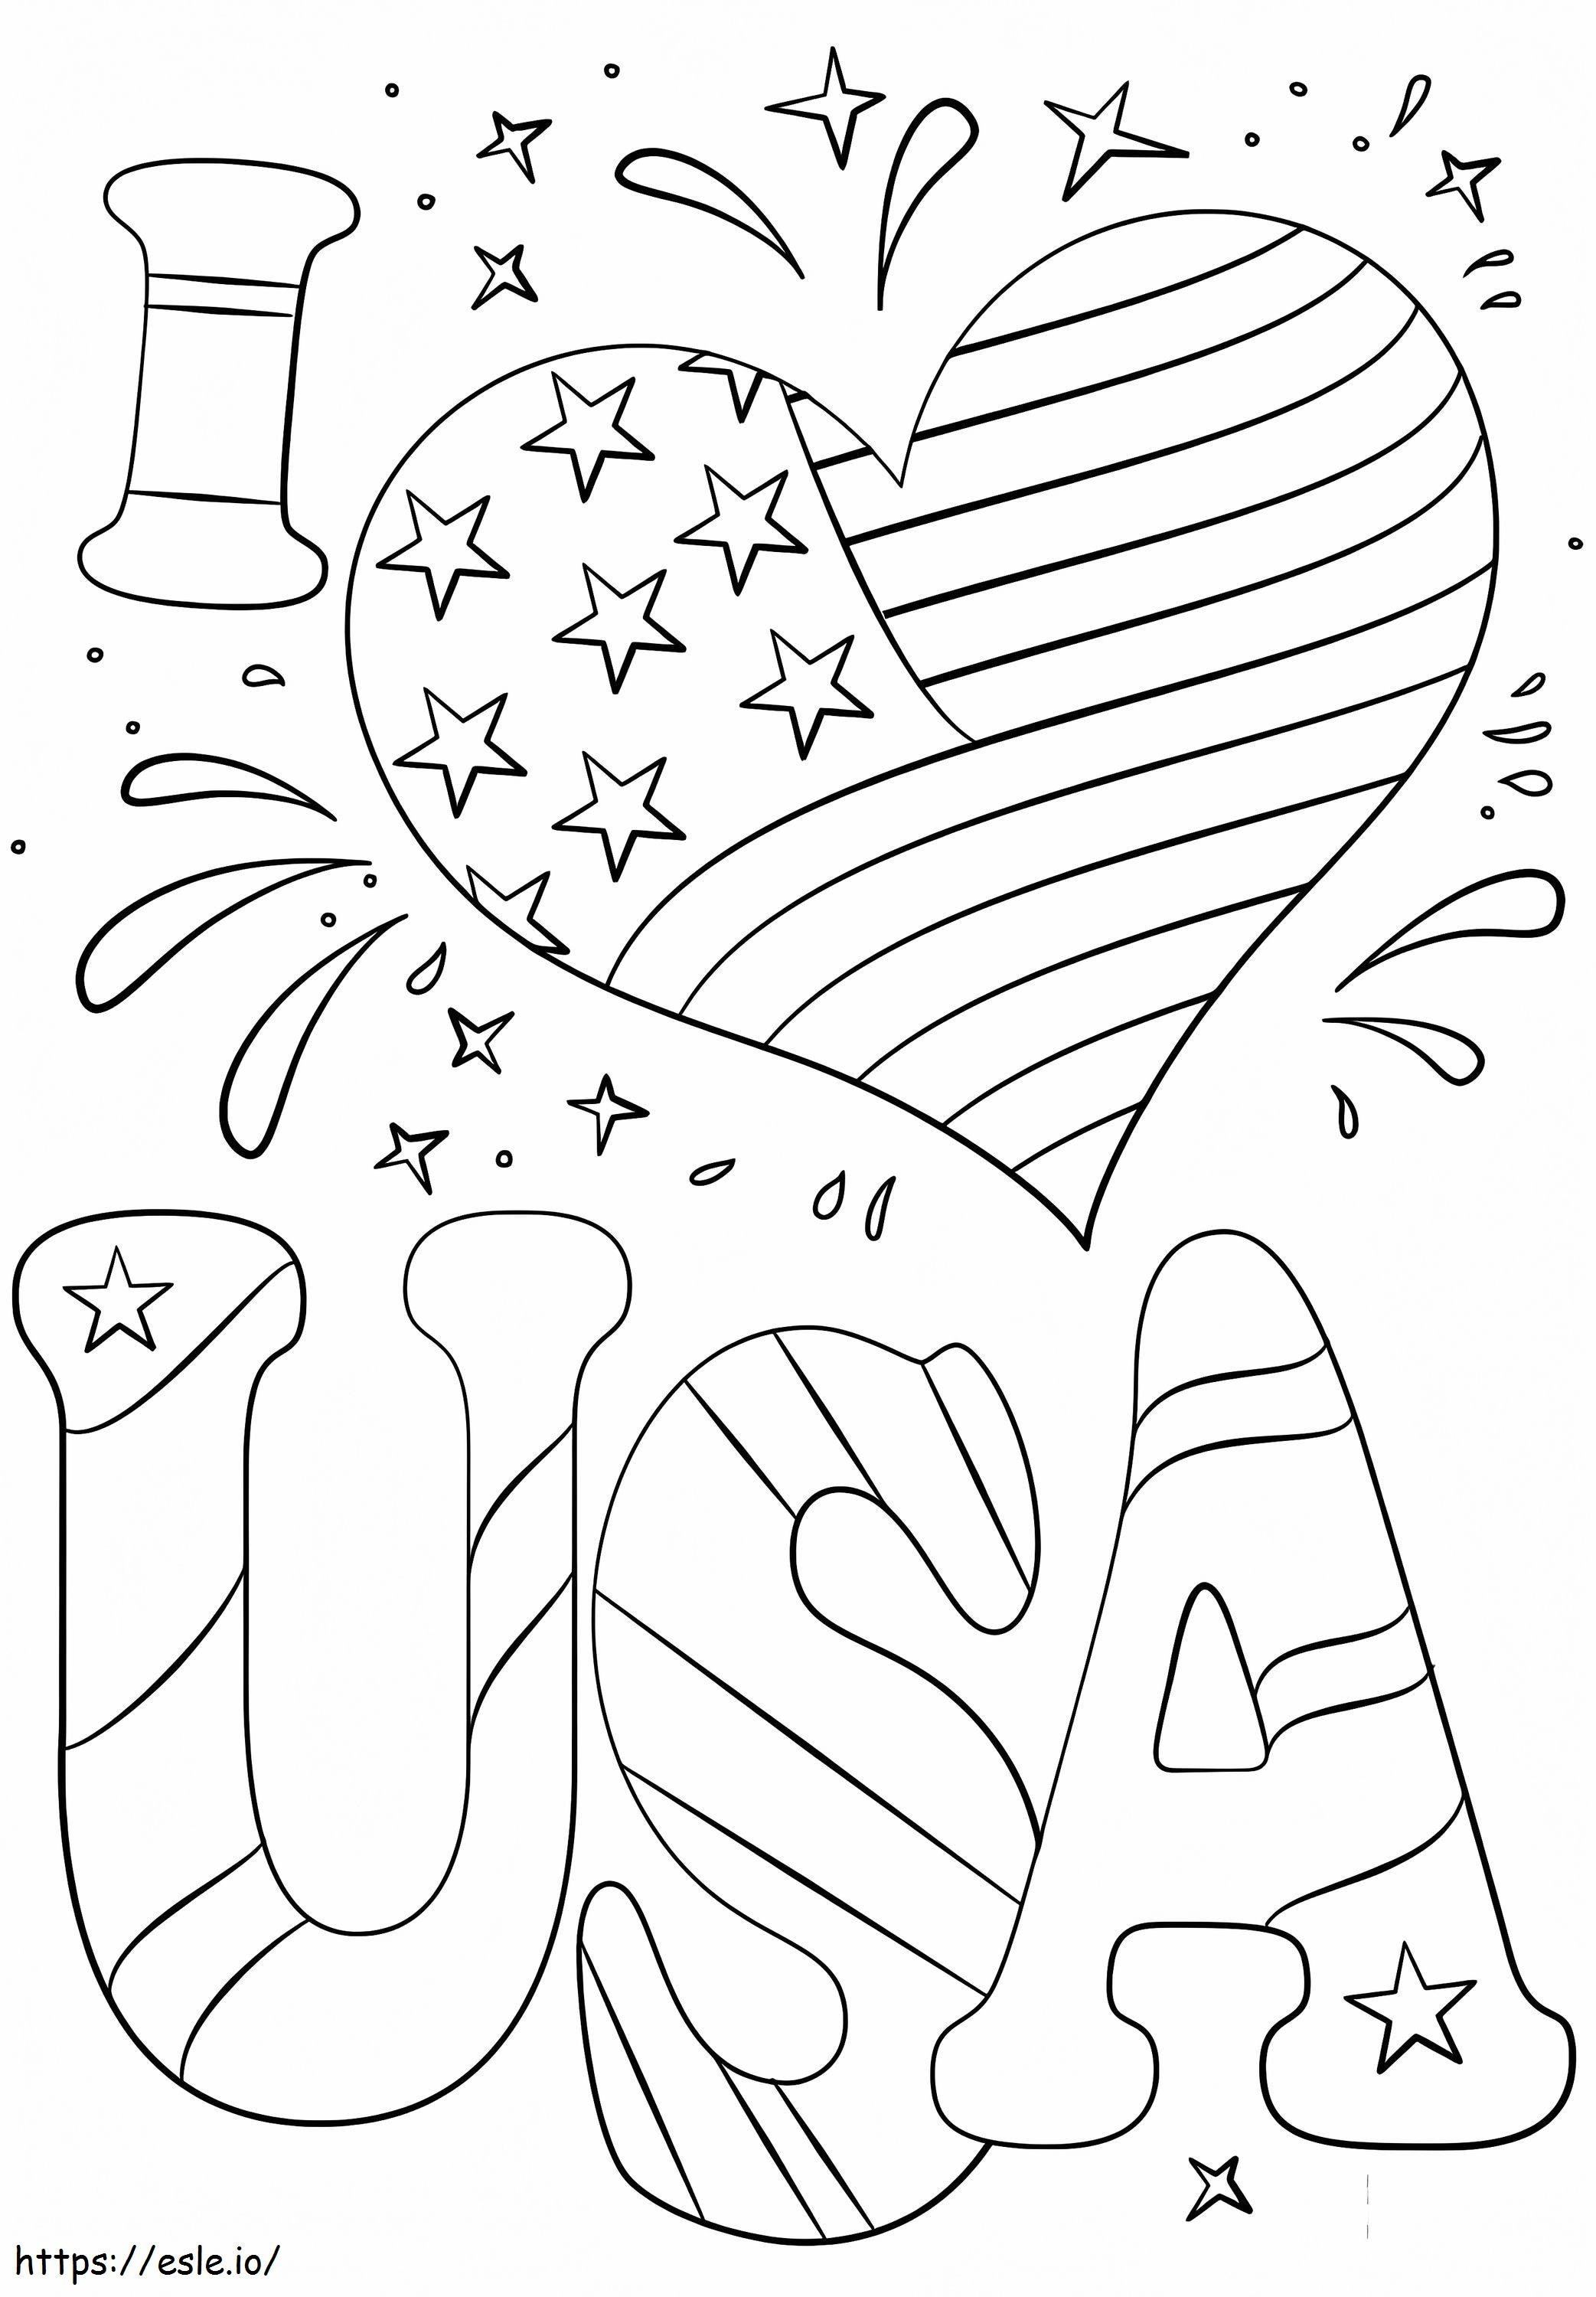 I Love USA coloring page